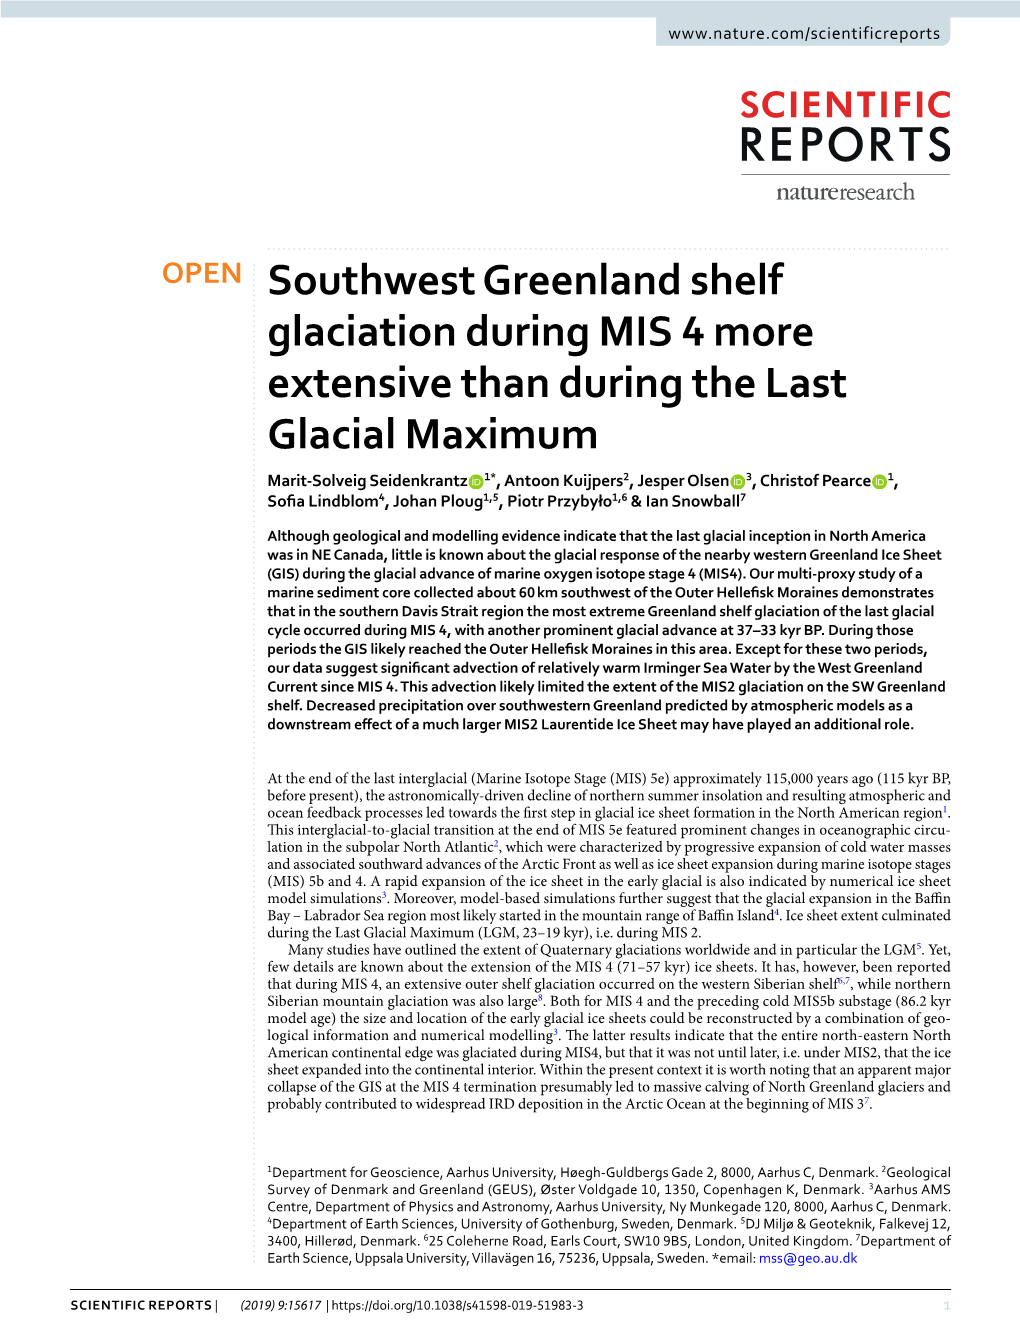 Southwest Greenland Shelf Glaciation During MIS 4 More Extensive Than During the Last Glacial Maximum